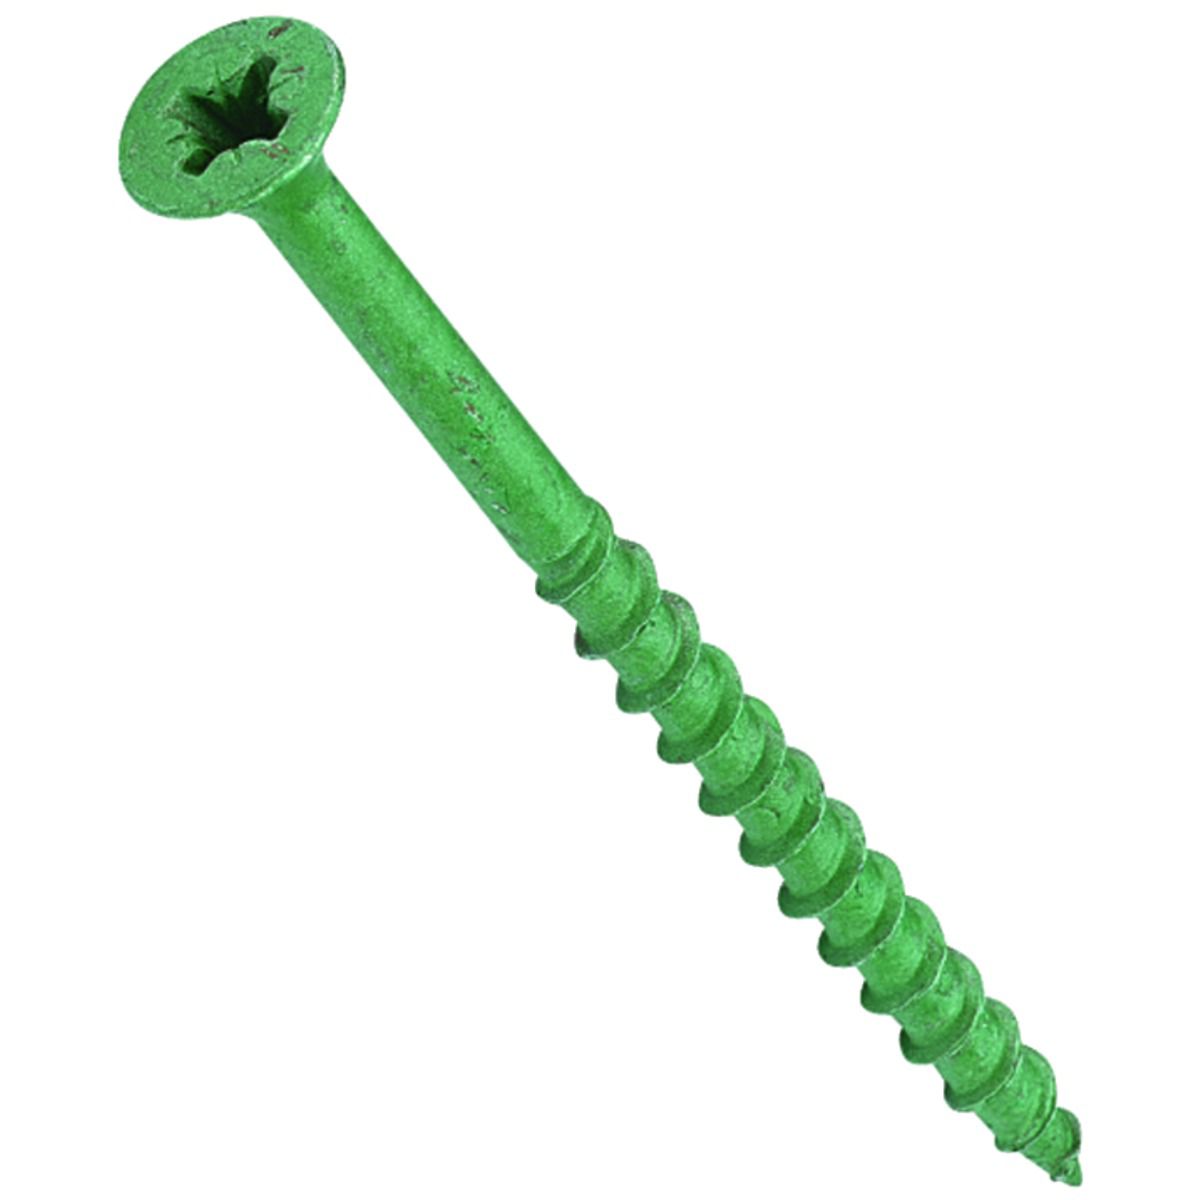 Image of Wickes External Grade Screw - Green No 8 x 32mm Pack of 20